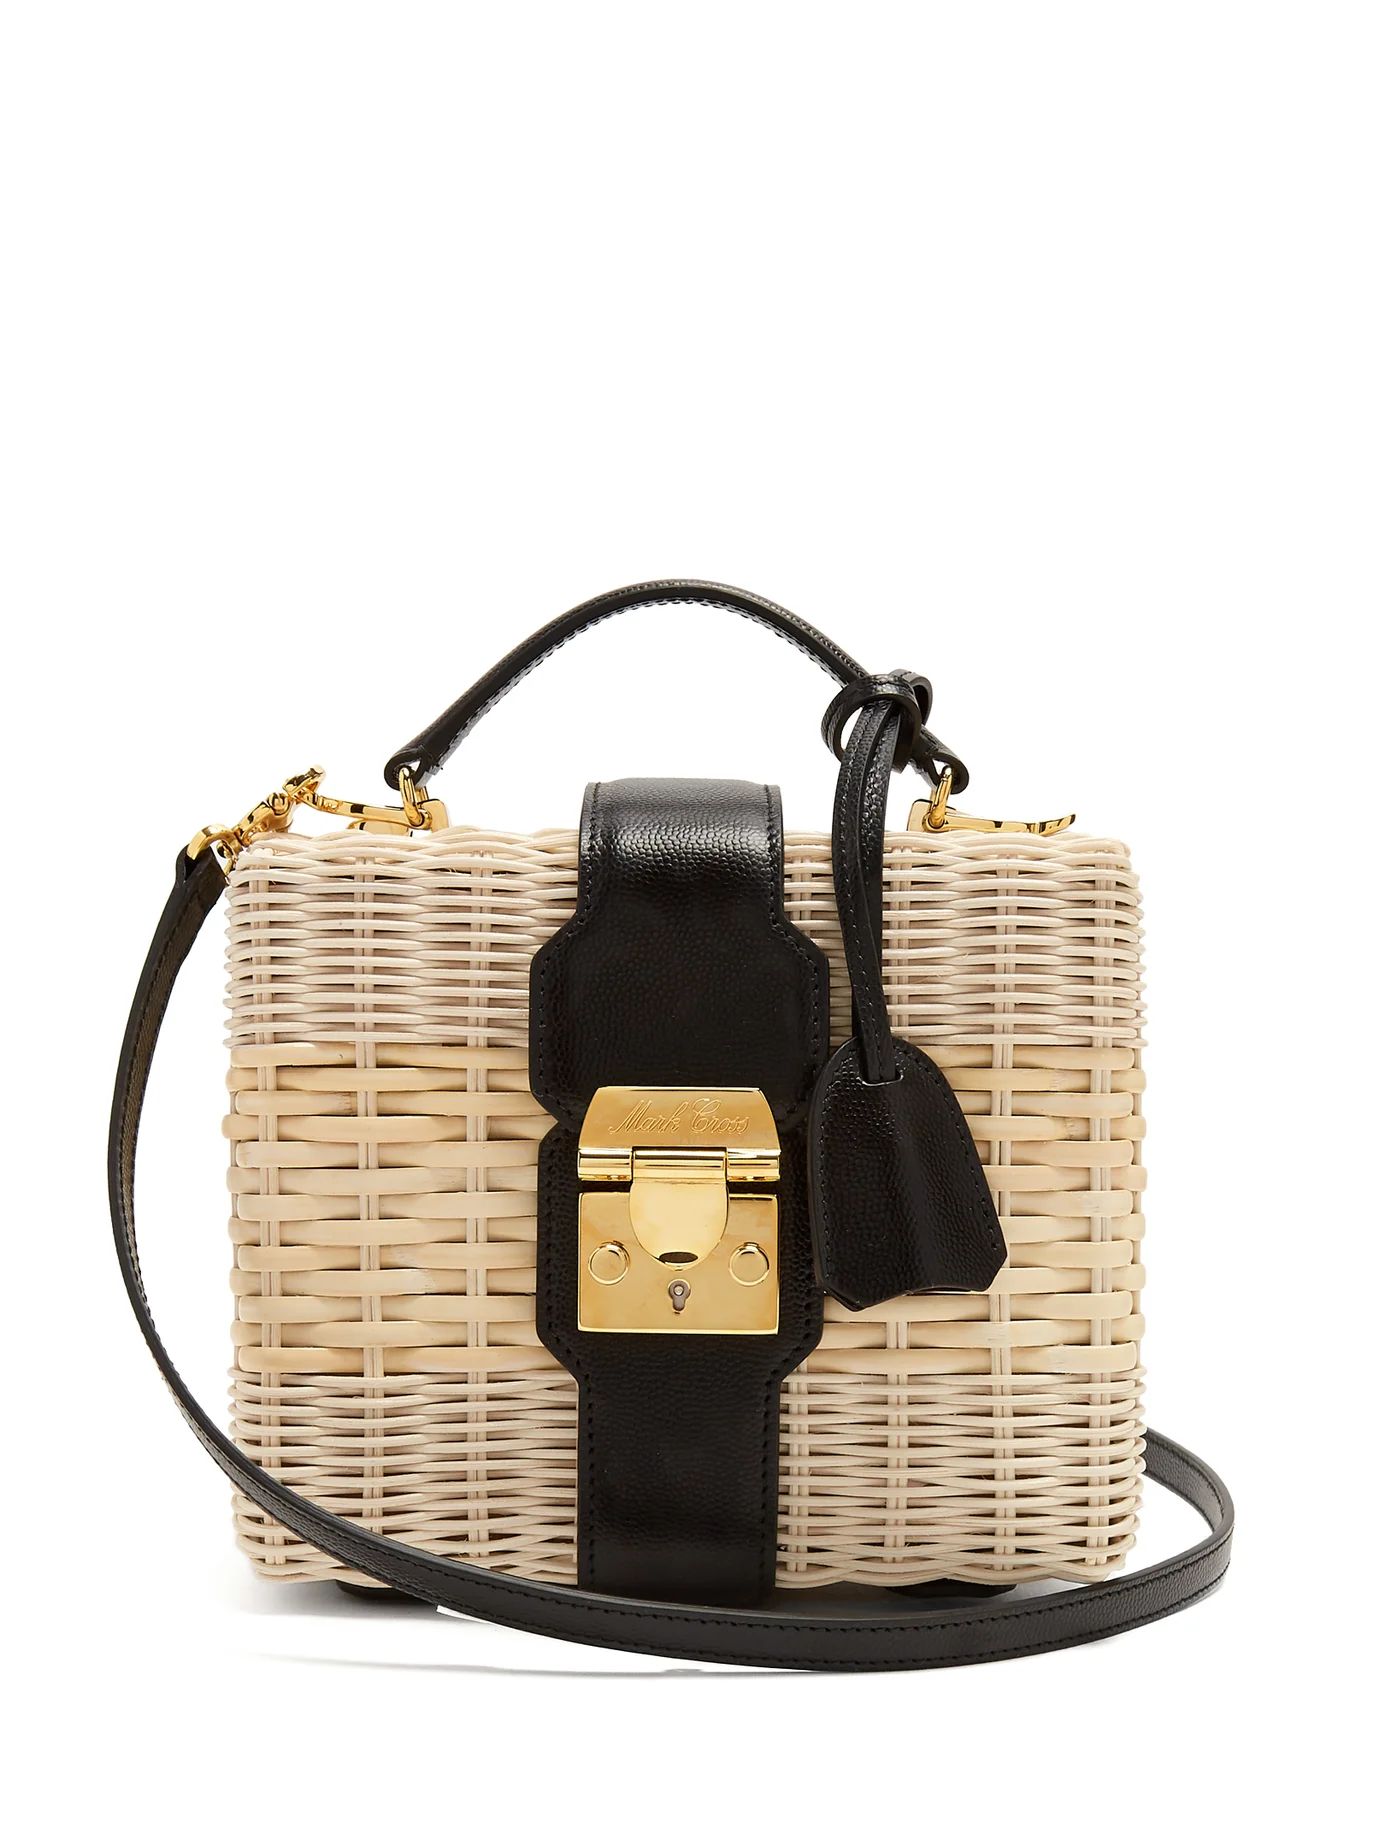 X HVN Harley small wicker basket bag | Matches (US)